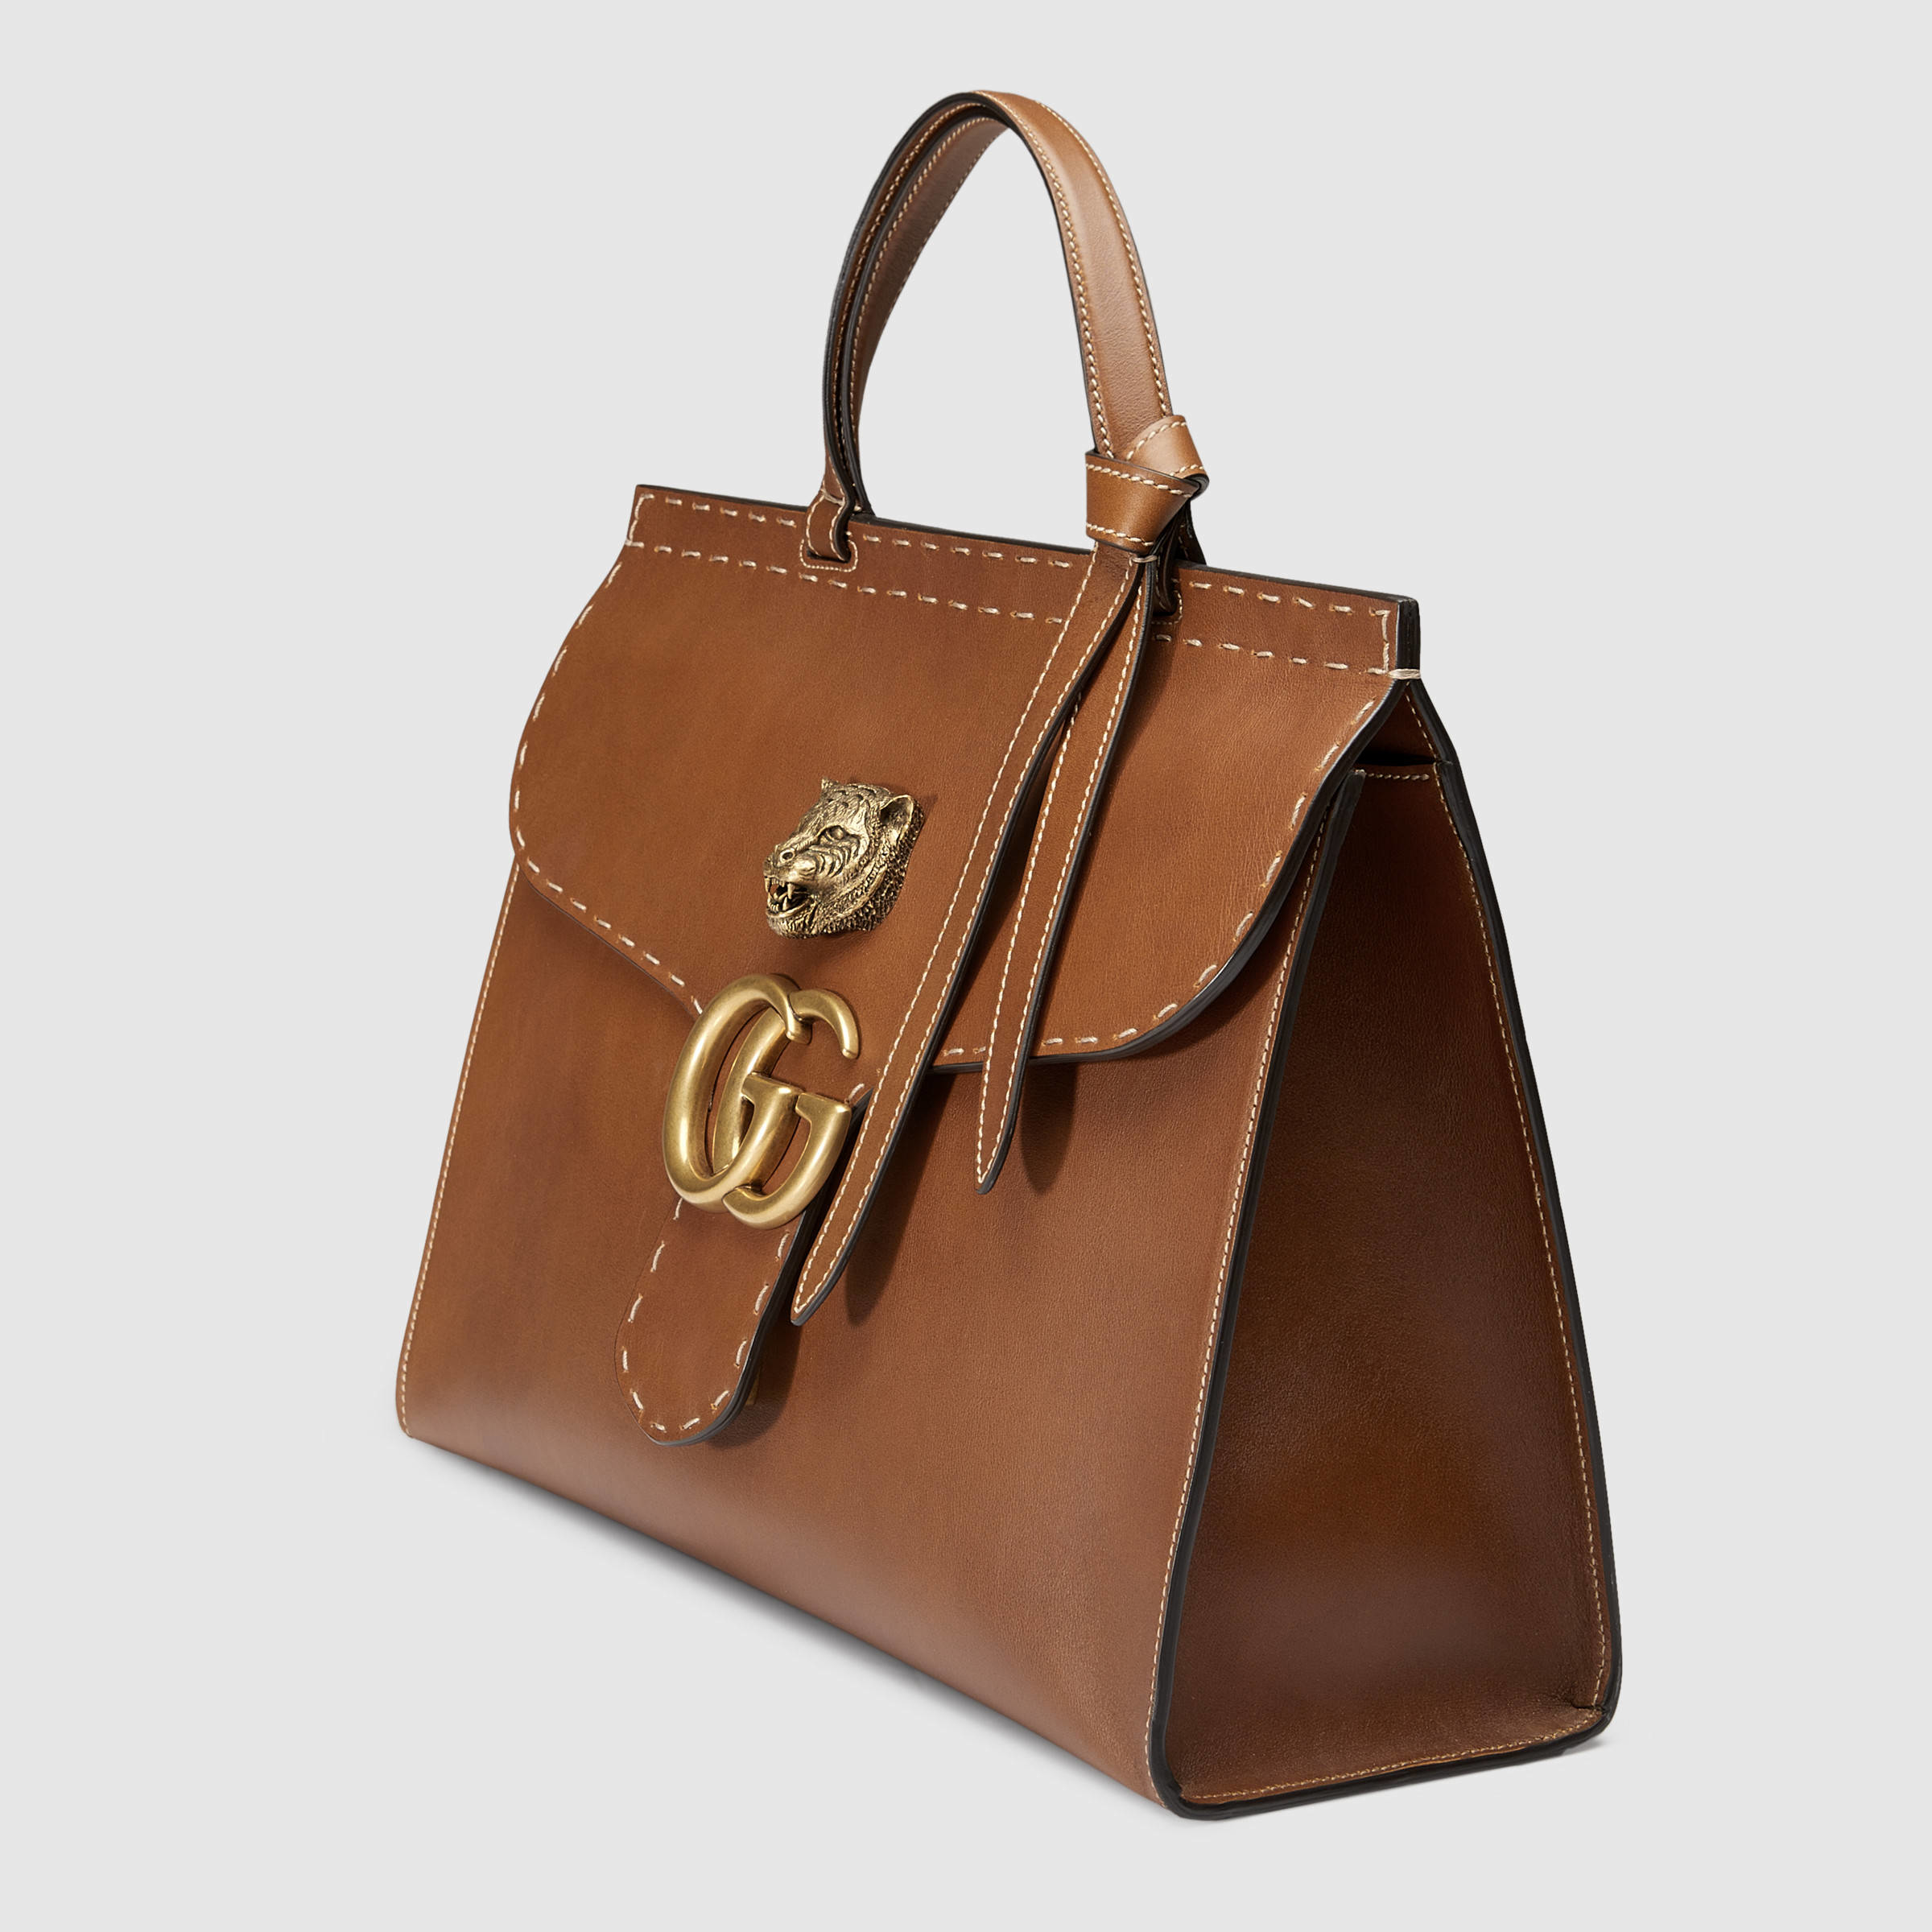 Gucci GG Marmont Leather Top Handle Bag in Brown - Lyst